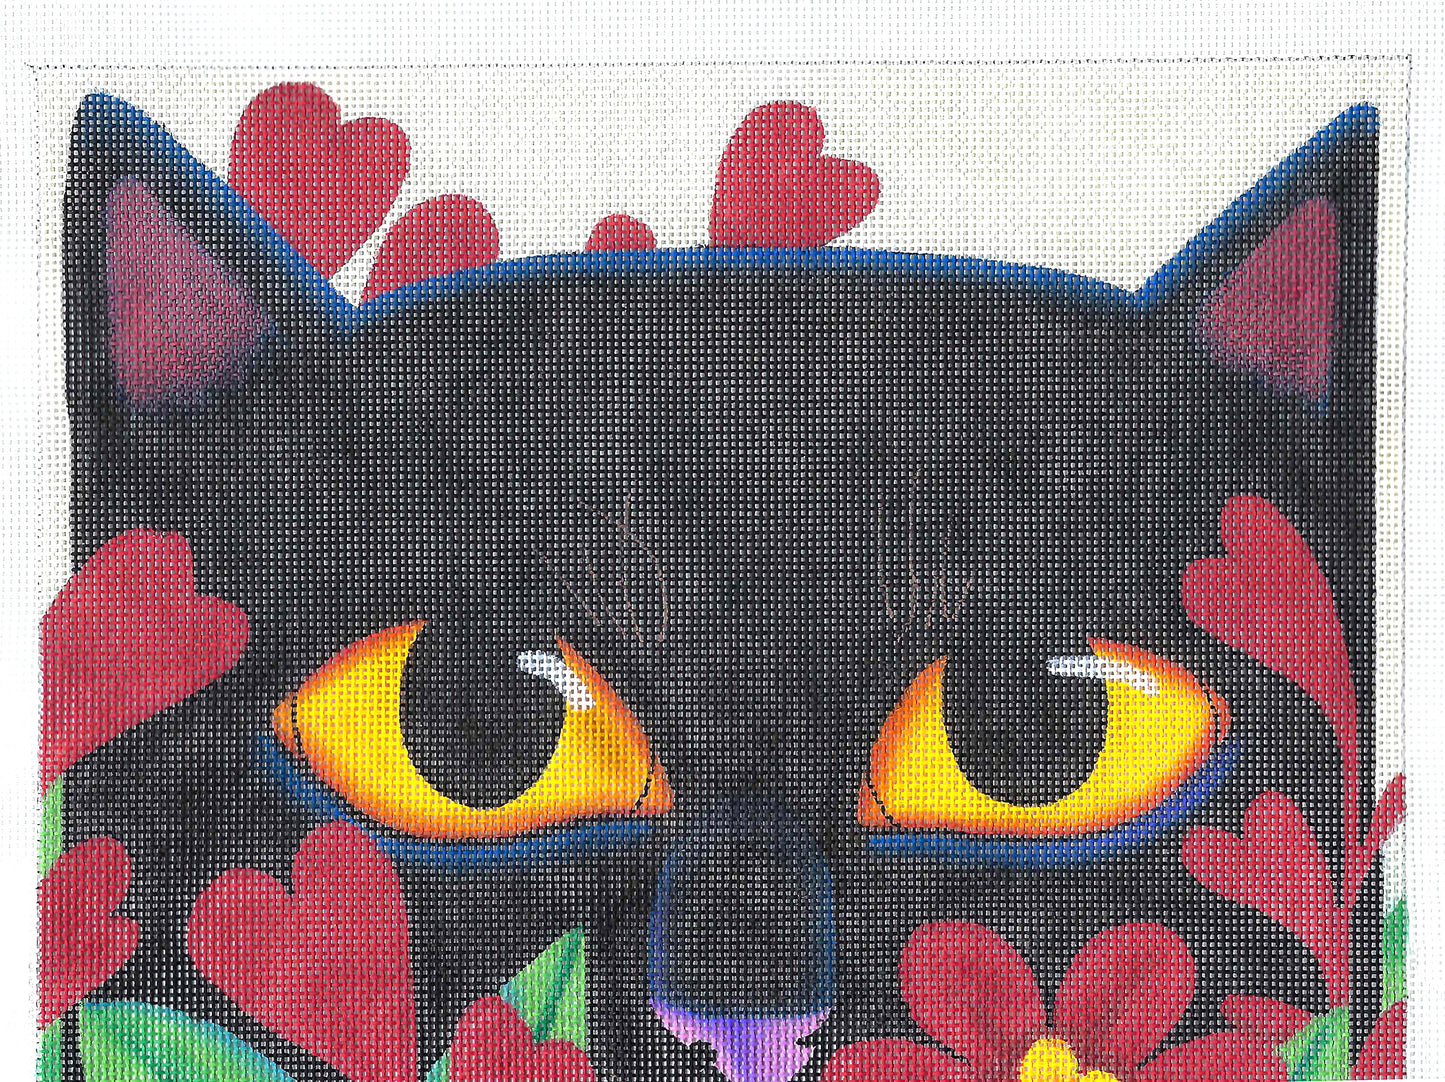 Cat ~ Black Cat with Mysterious Eyes in Flowers handpainted Needlepoint Canvas by Vicky Mount from PLD